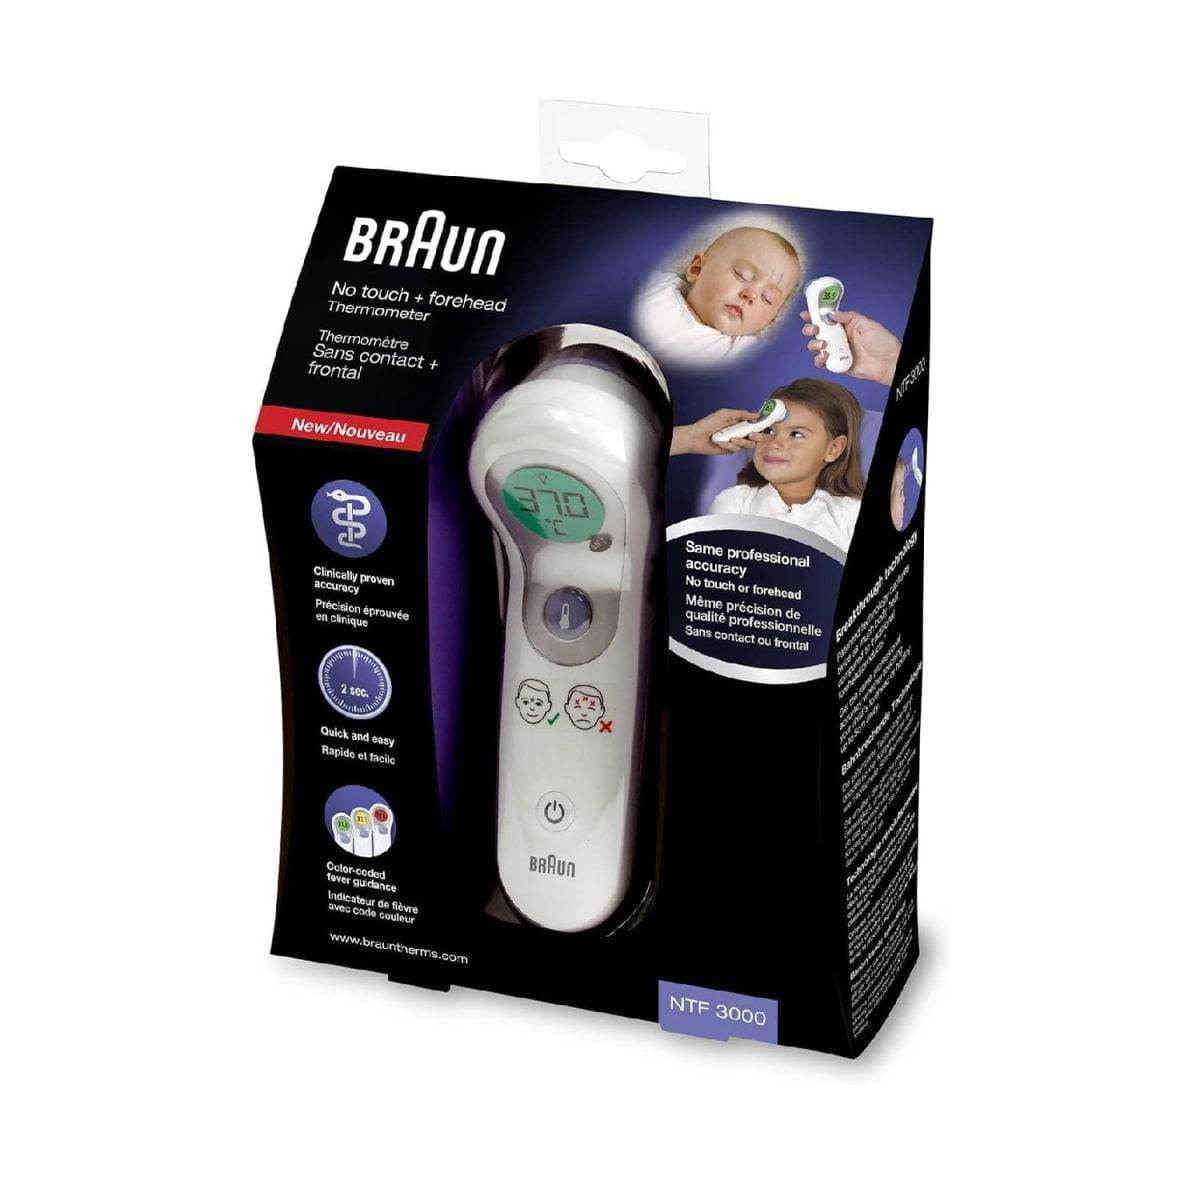 Lablab8 07 Braun &Lt;Div Class=&Quot;Product Attribute Overview&Quot;&Gt; &Lt;Div Class=&Quot;Value&Quot;&Gt; &Lt;Ul&Gt; &Lt;Li&Gt;Quick And Convenient Measurement In Both No Touch And Touch Mode&Lt;/Li&Gt; &Lt;Li&Gt;Colour-Coded Temperature Guidance&Lt;/Li&Gt; &Lt;Li&Gt;Silent Mode&Lt;/Li&Gt; &Lt;/Ul&Gt; [Video Width=&Quot;720&Quot; Height=&Quot;404&Quot; Mp4=&Quot;Https://Lablaab.com/Wp-Content/Uploads/2020/05/B1T8F7T-Ias.mp4&Quot;][/Video] &Lt;/Div&Gt; &Lt;/Div&Gt; Braun Braun No Touch Plus Touch Forehead Thermometer (Ntf3000)